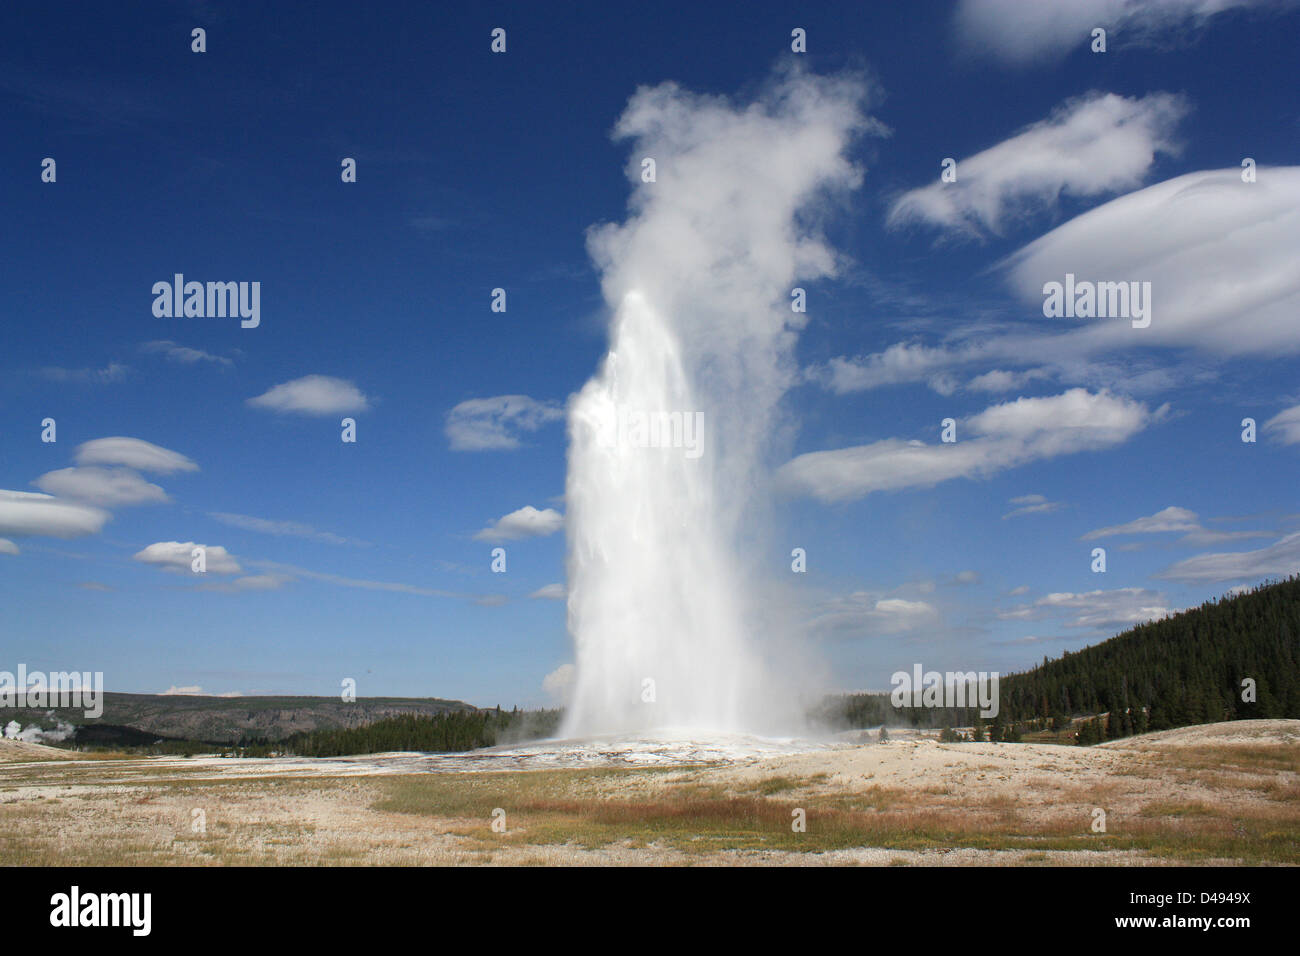 Old Faithful Geyser, Wyoming, Yellowstone National Park, États-Unis Banque D'Images